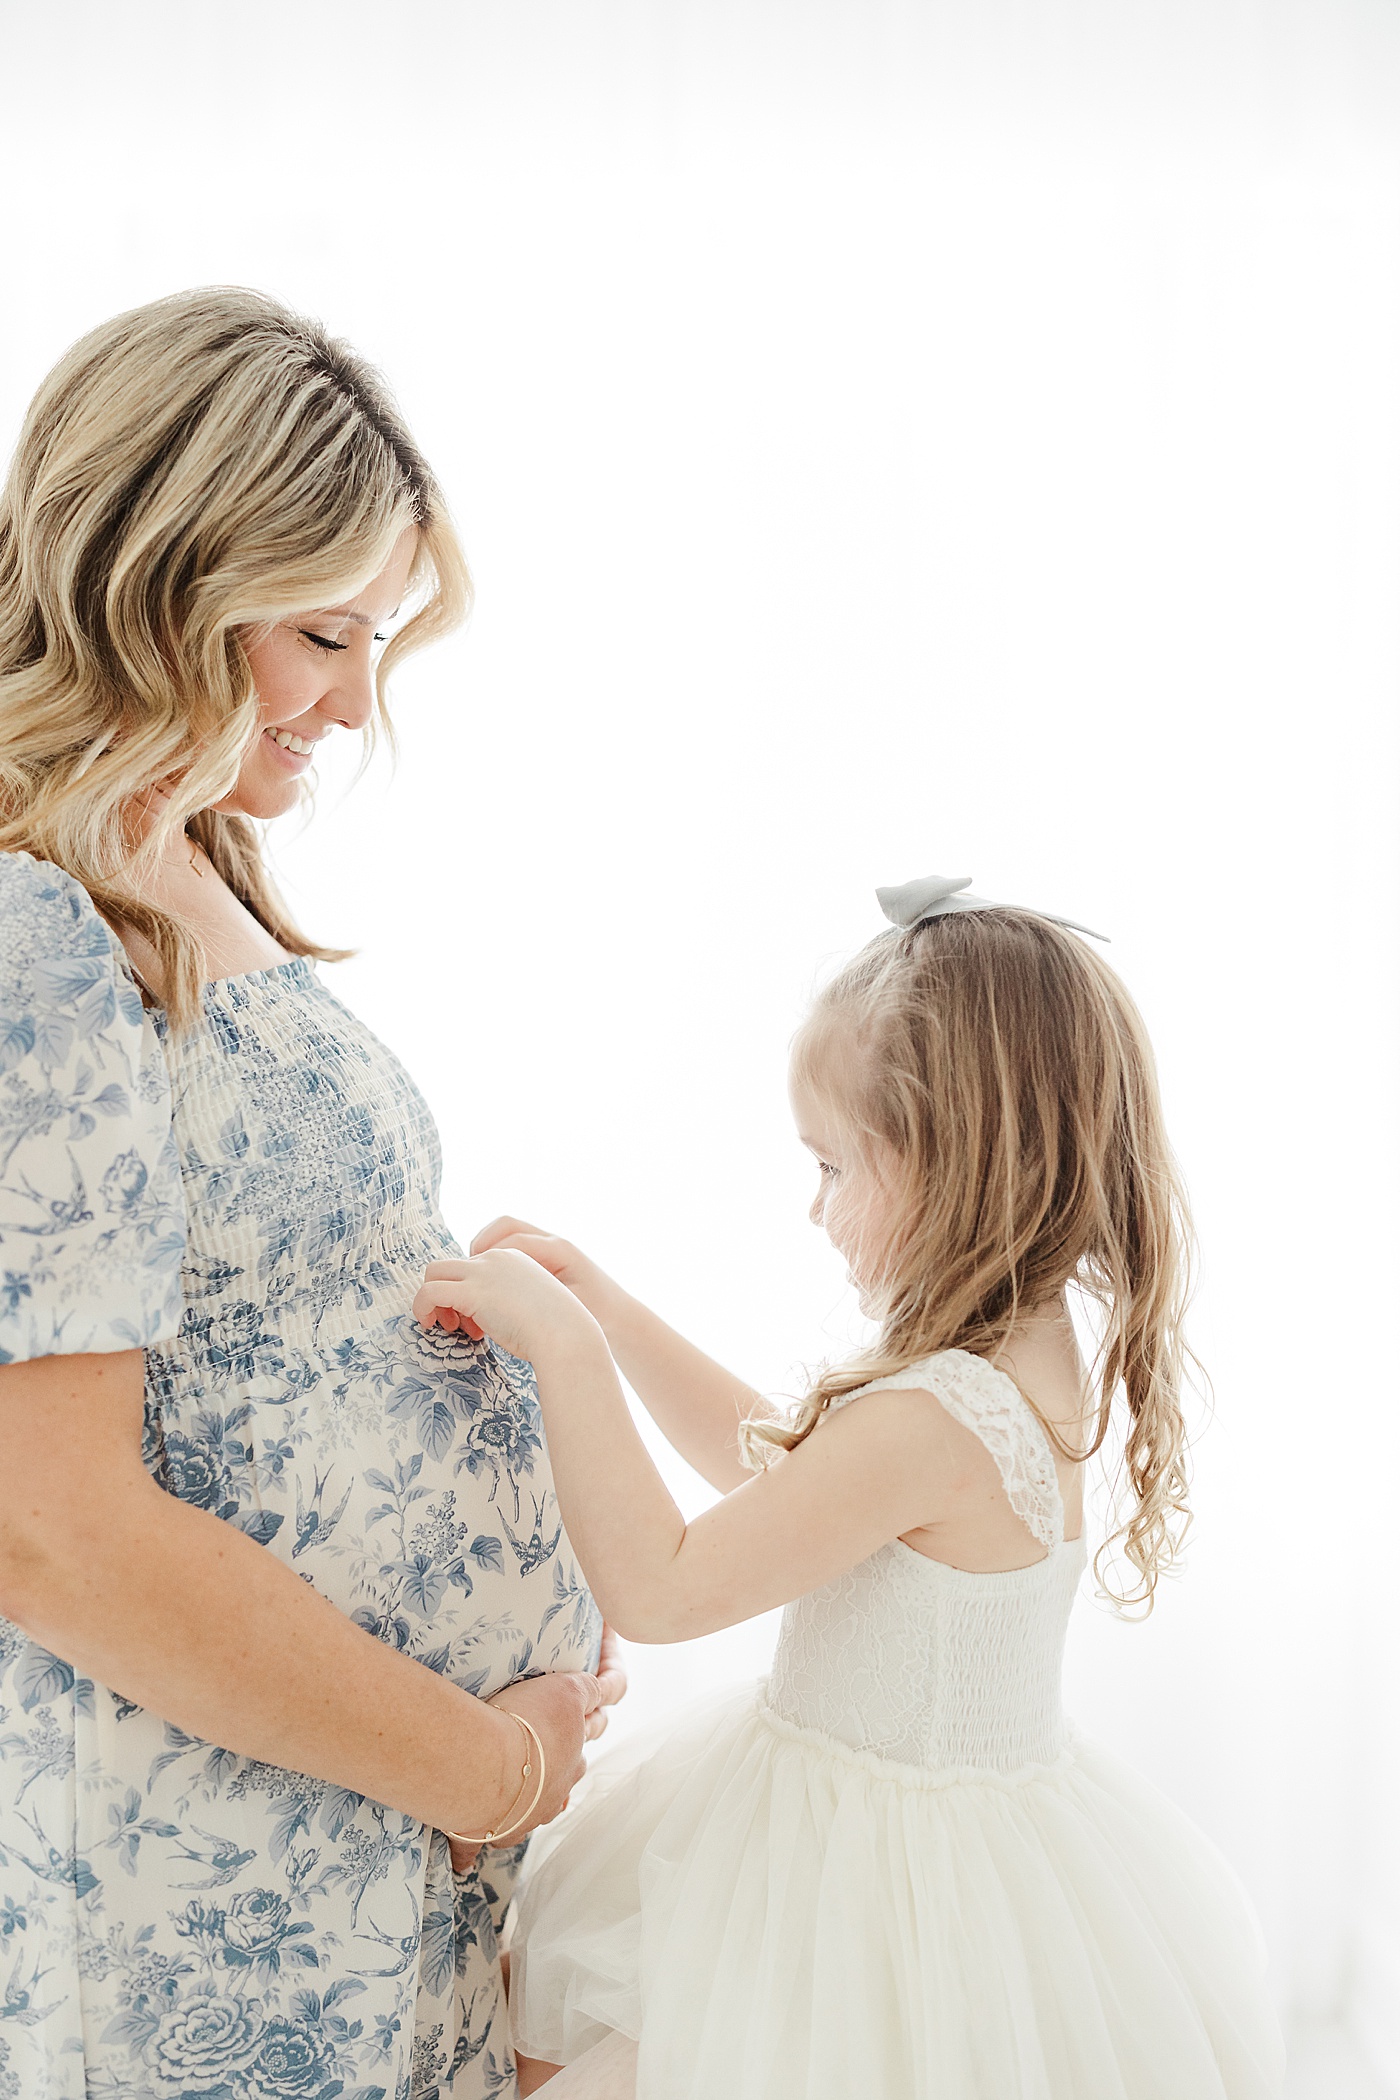 Mother-daughter maternity photoshoot in Westport, CT studio with Kristin Wood Photography.